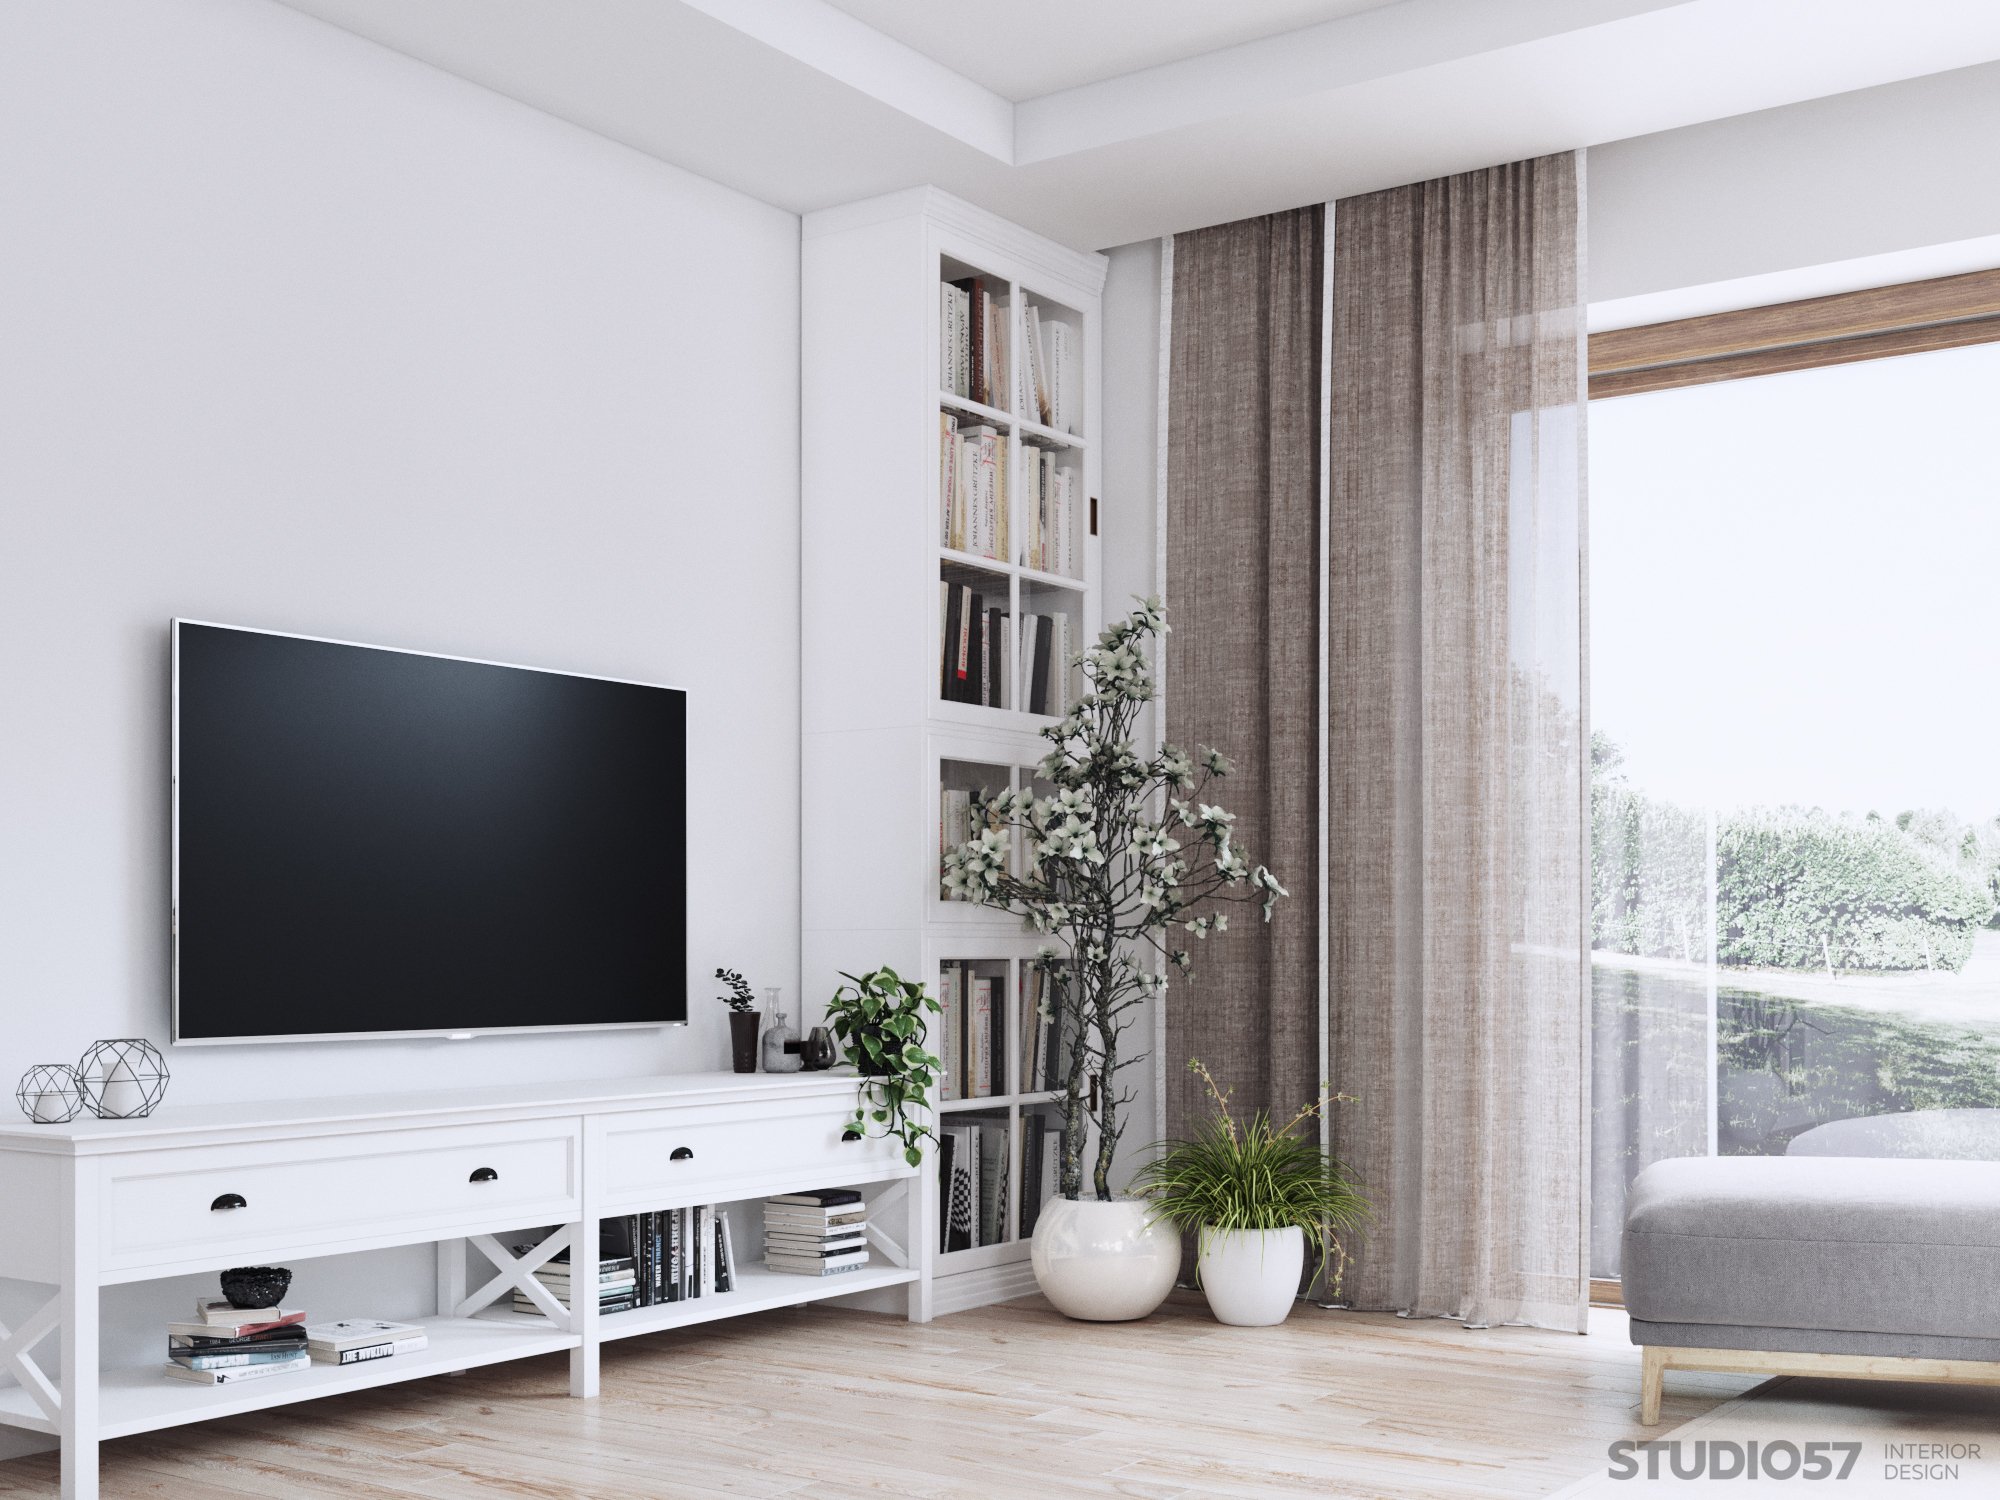 Design of the living room in light colors photo